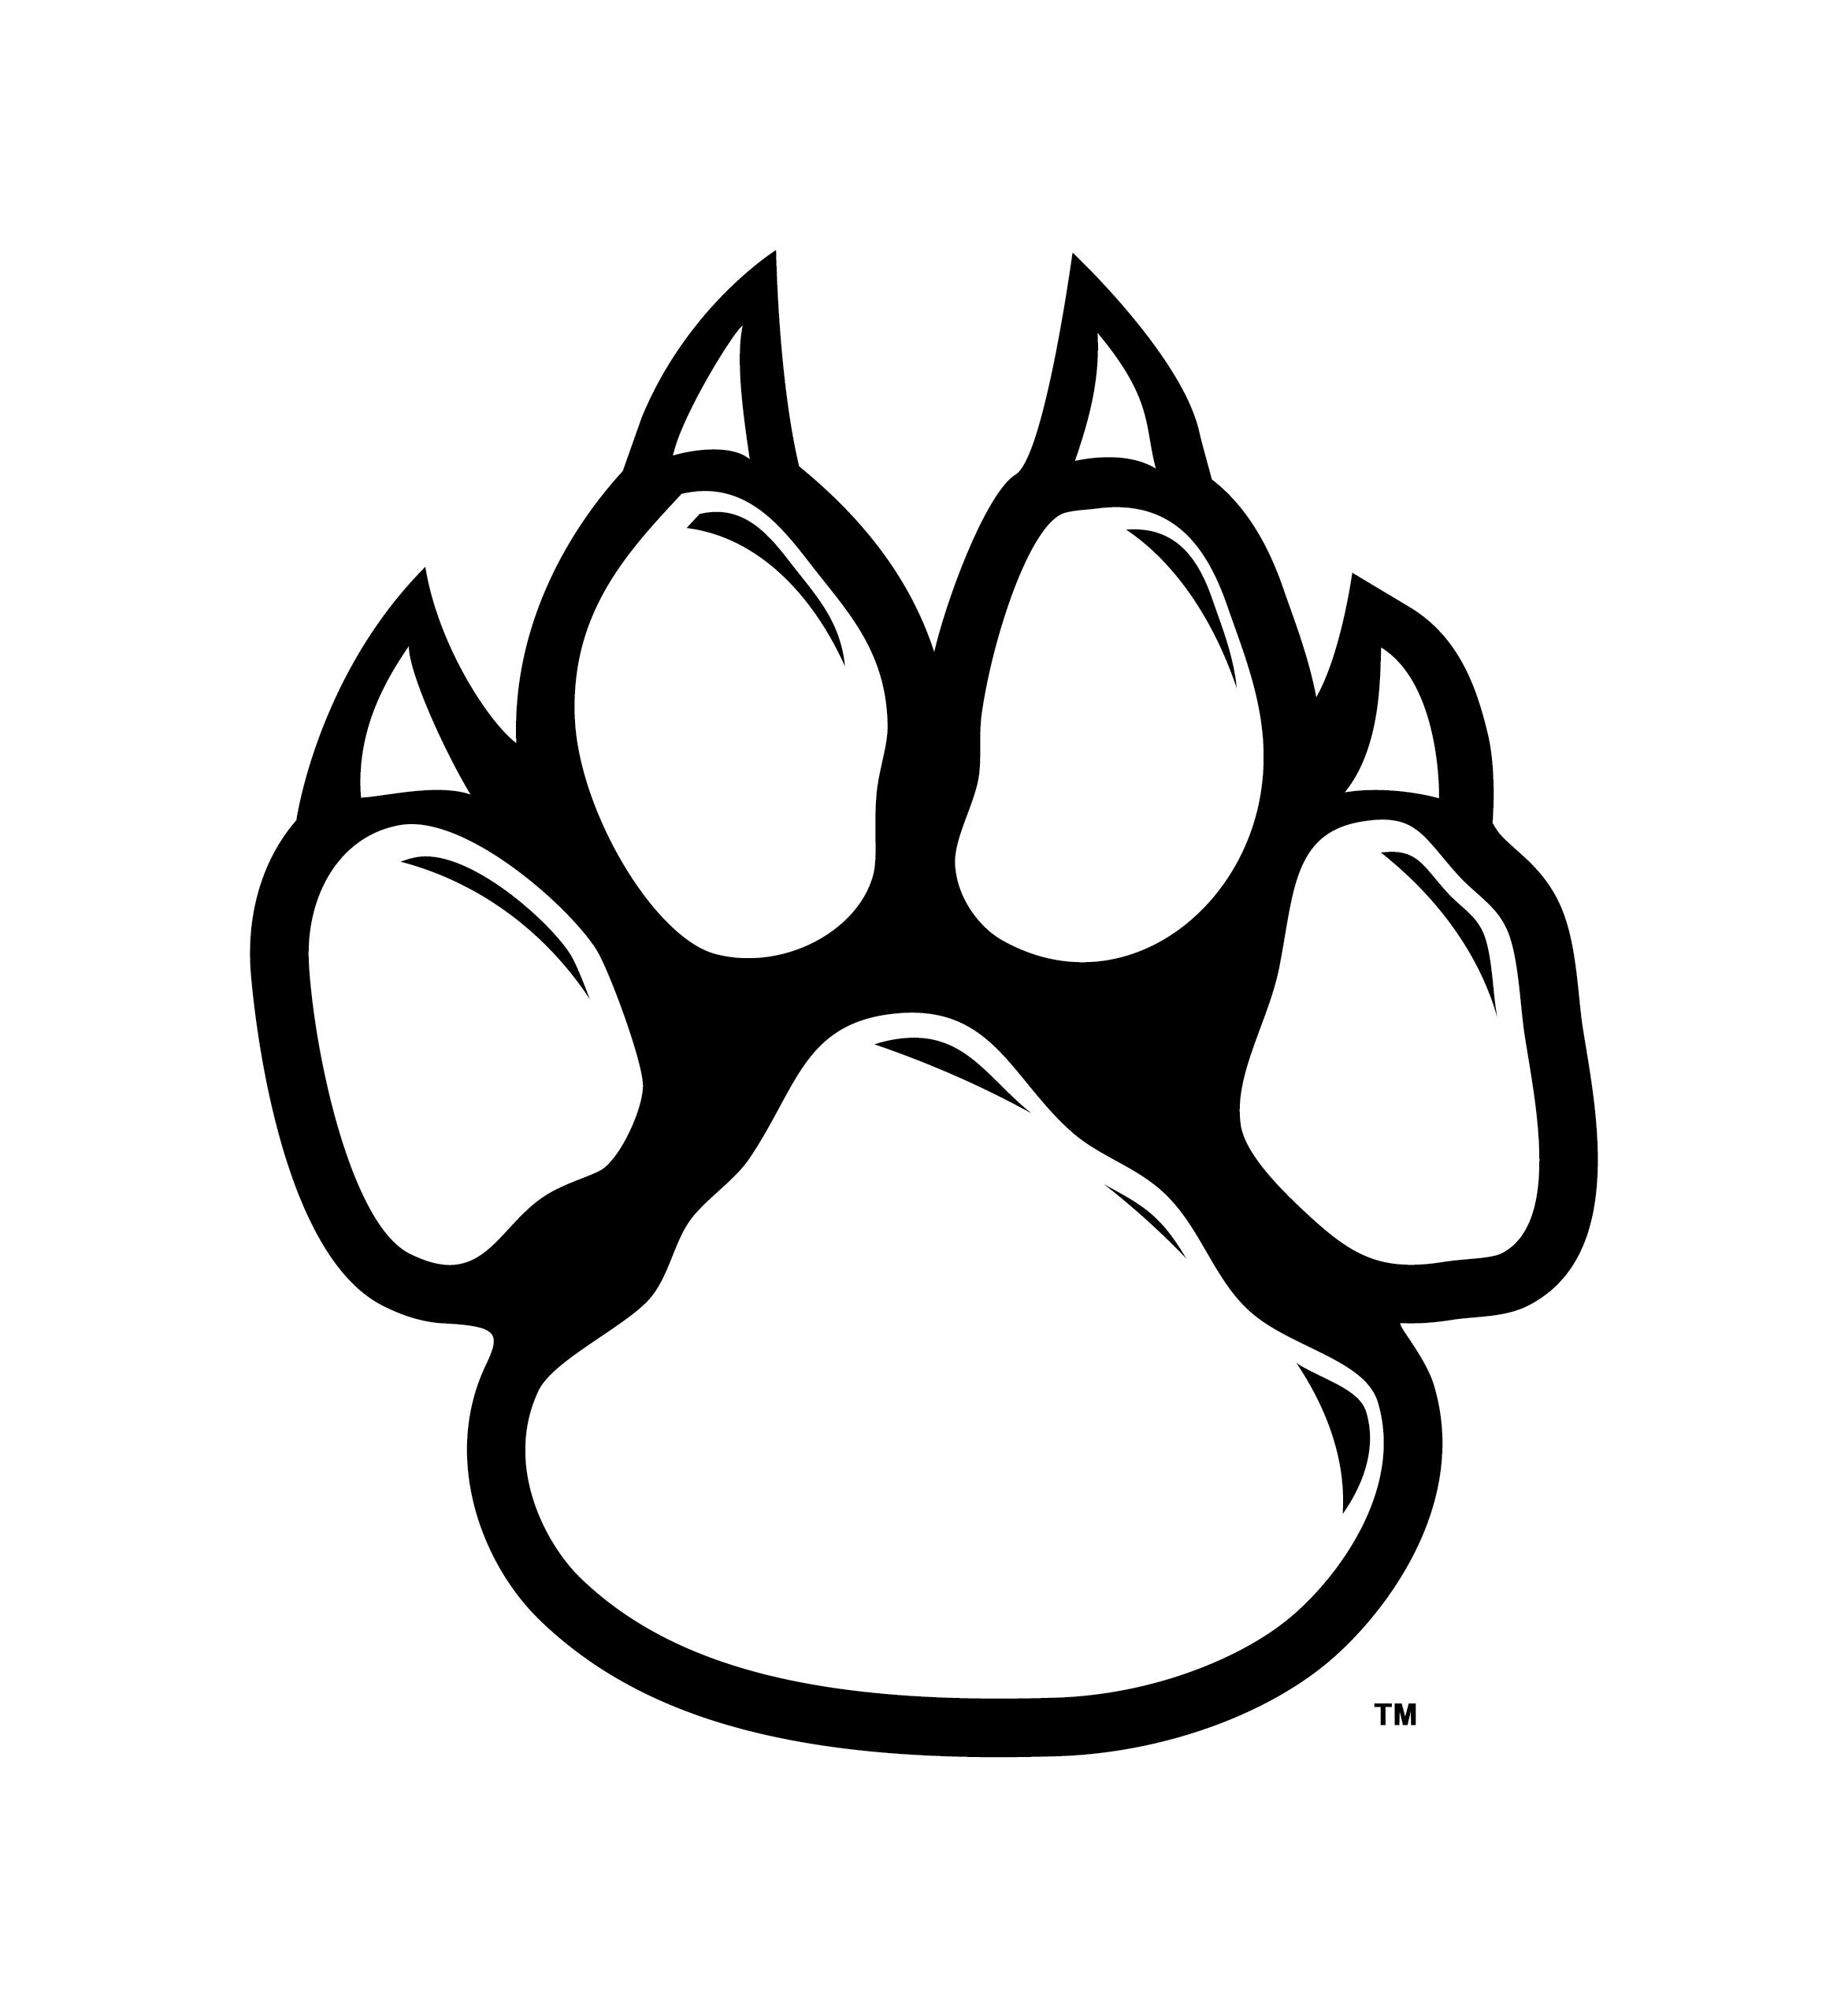 12 Paw Print Drawings Free Cliparts That You Can Download To You